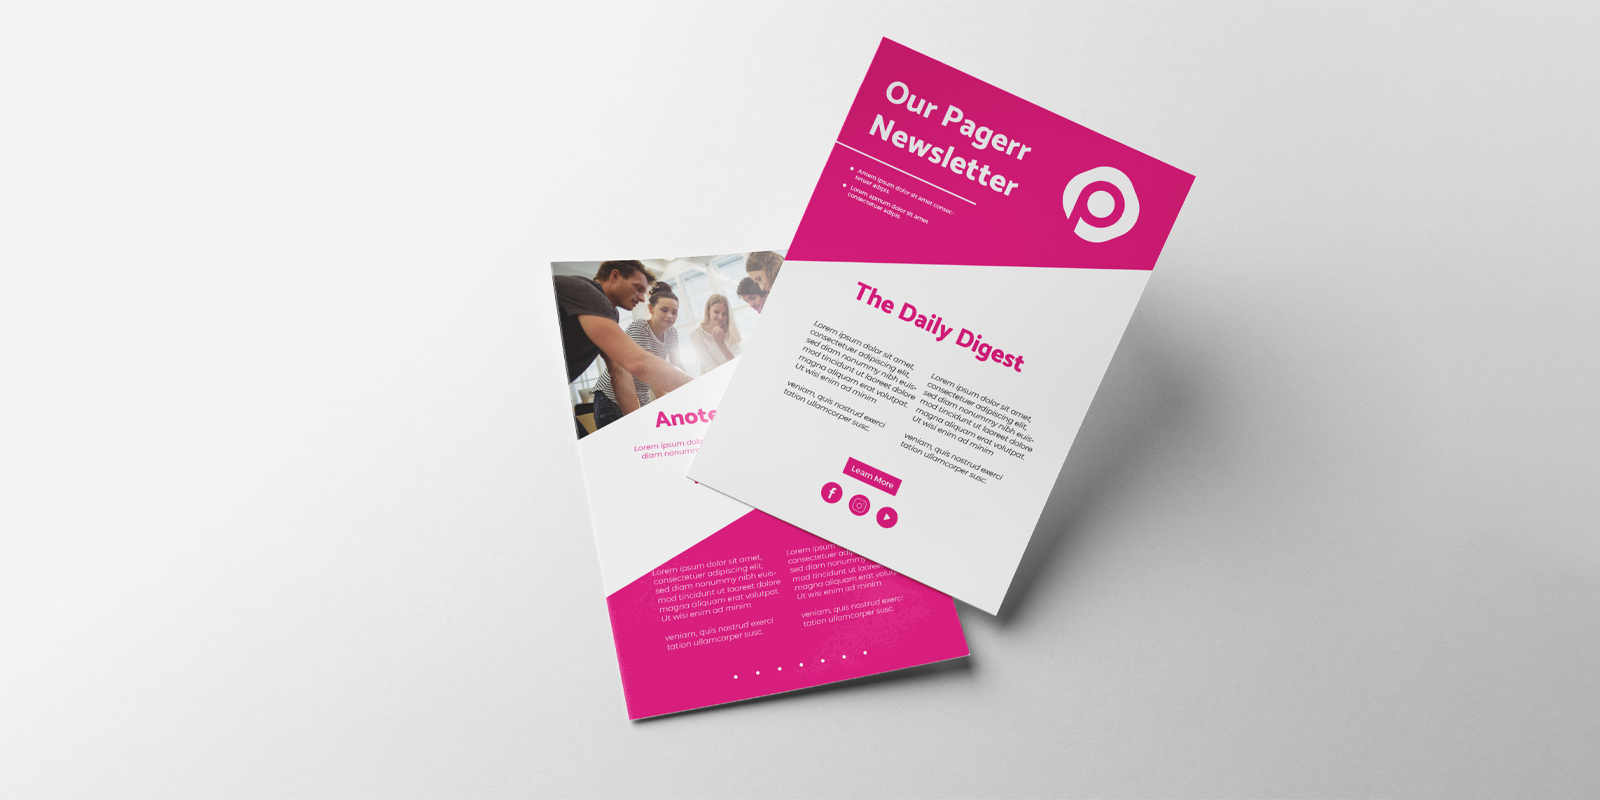 Newsletters in Brisbane - Print with Pagerr